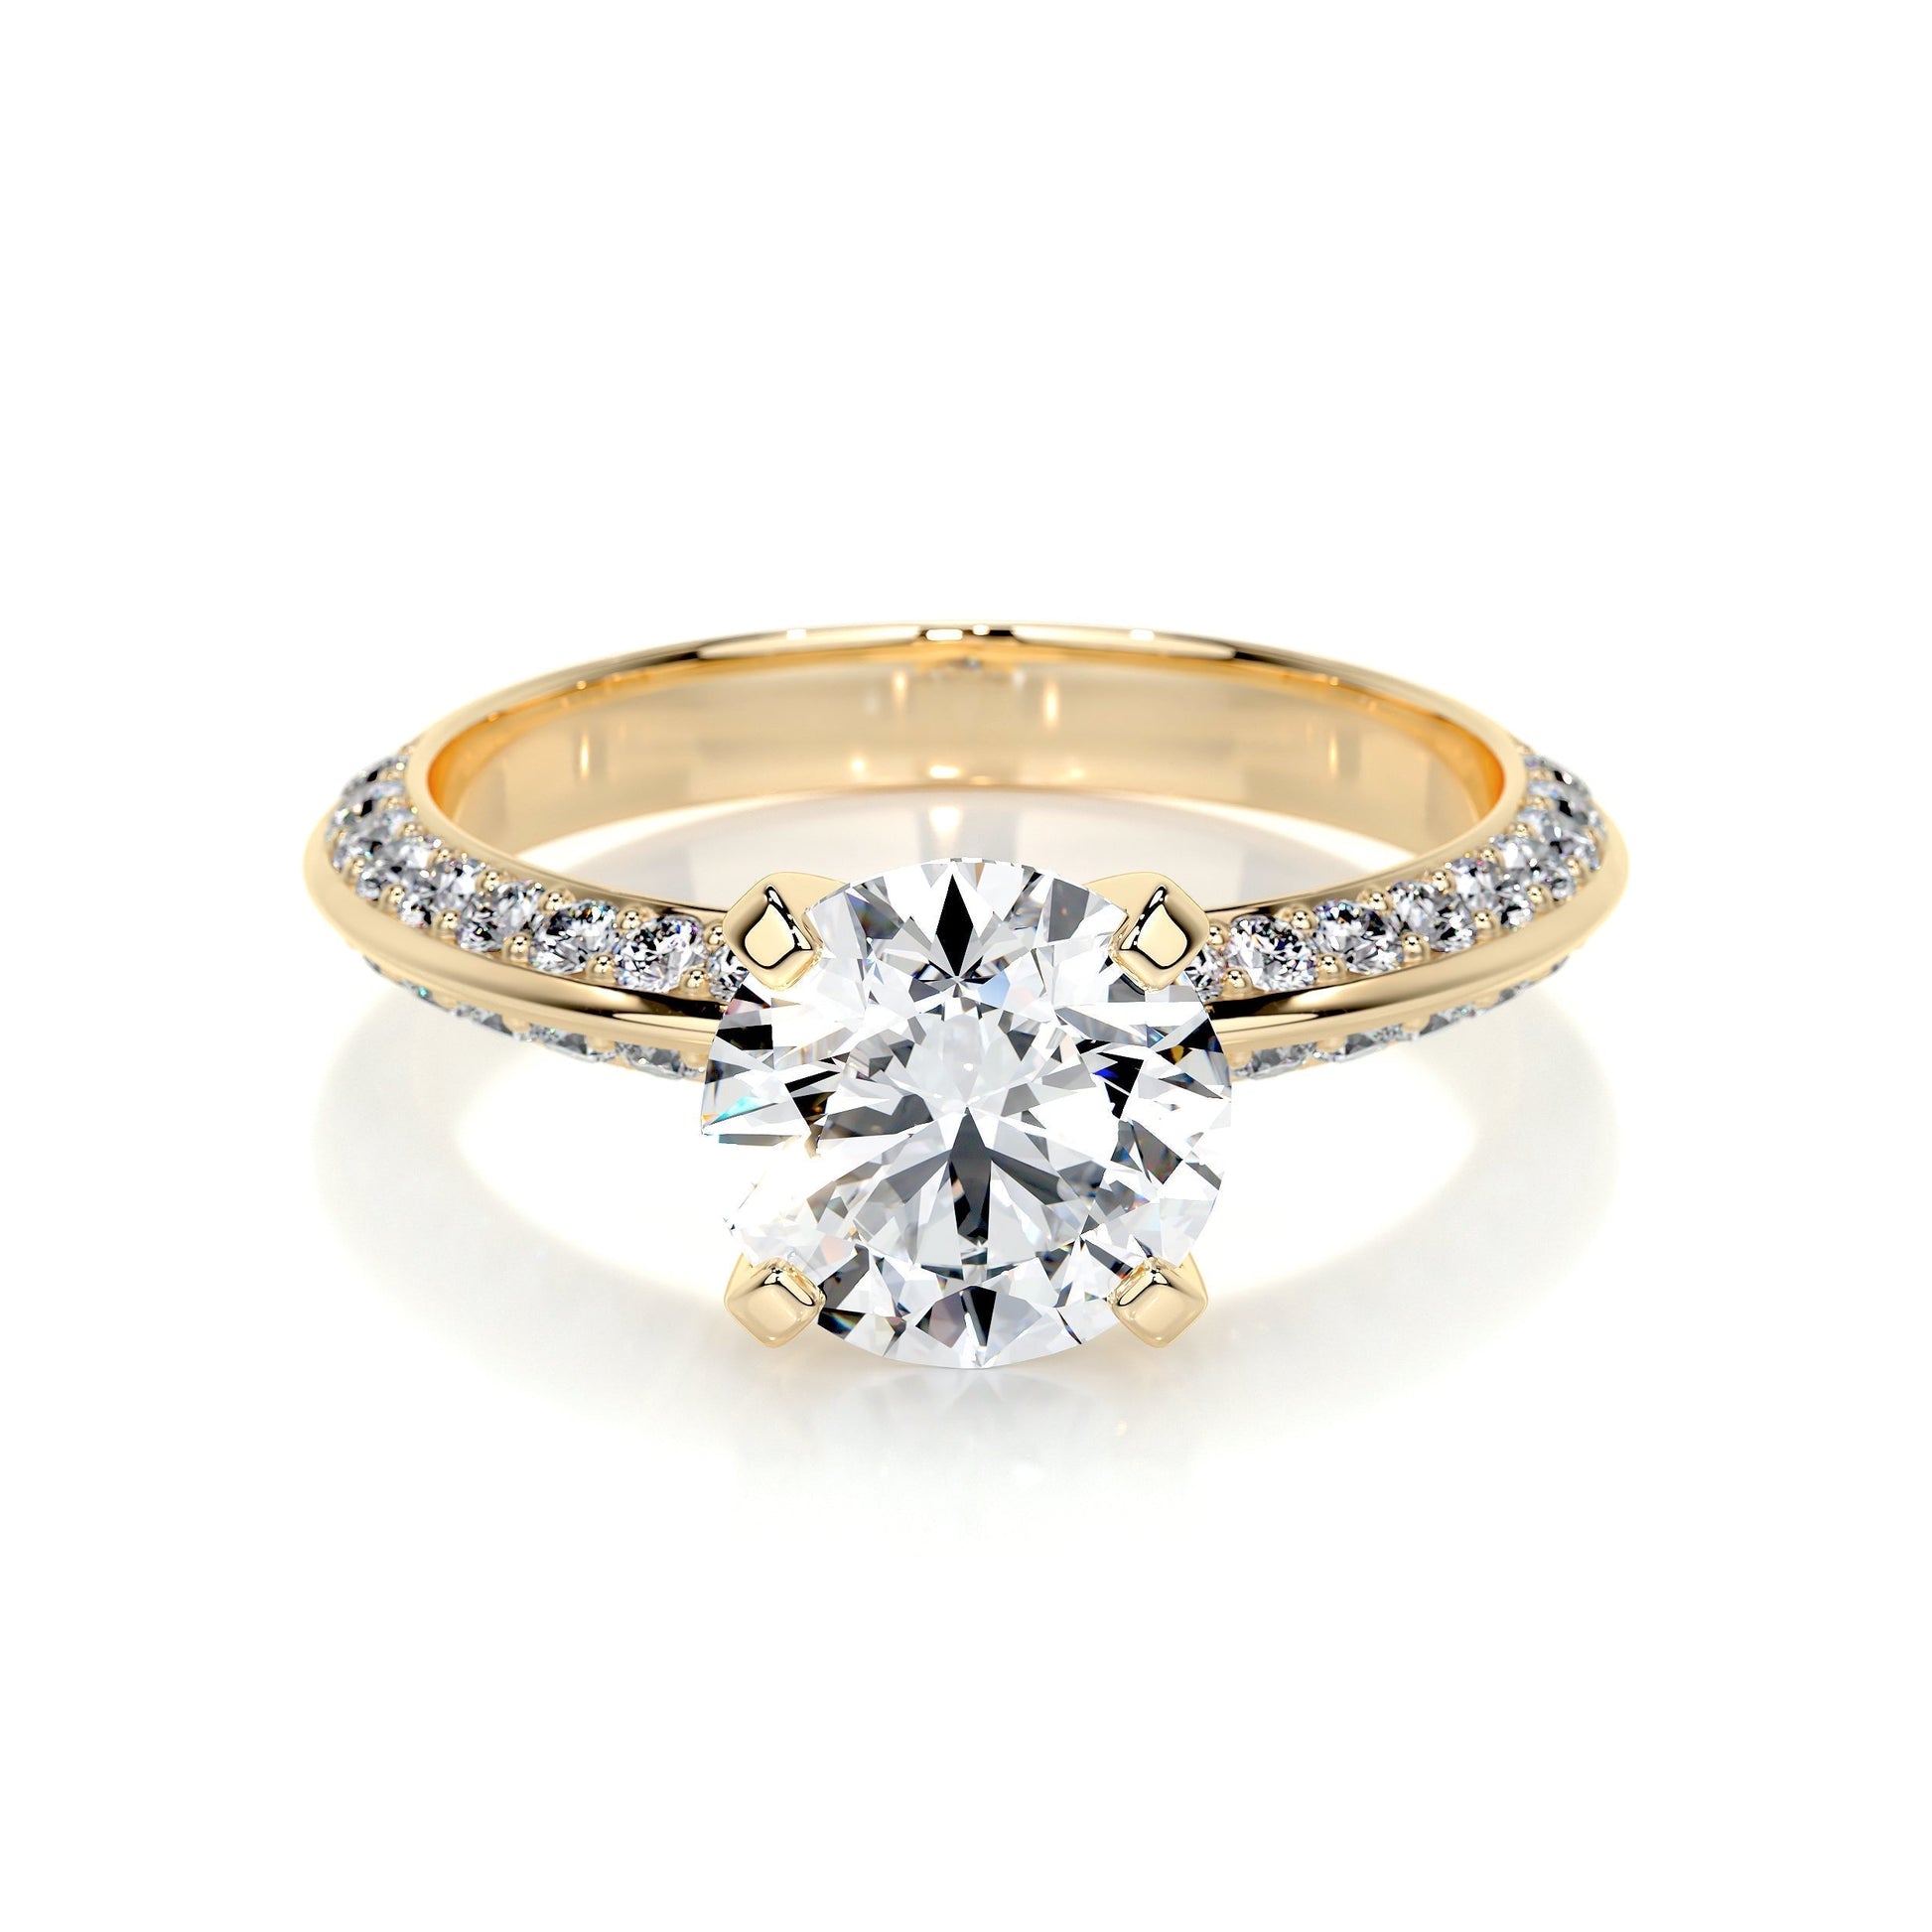 2.0 CT Round Solitaire CVD E/VS2 Diamond Engagement Ring 6